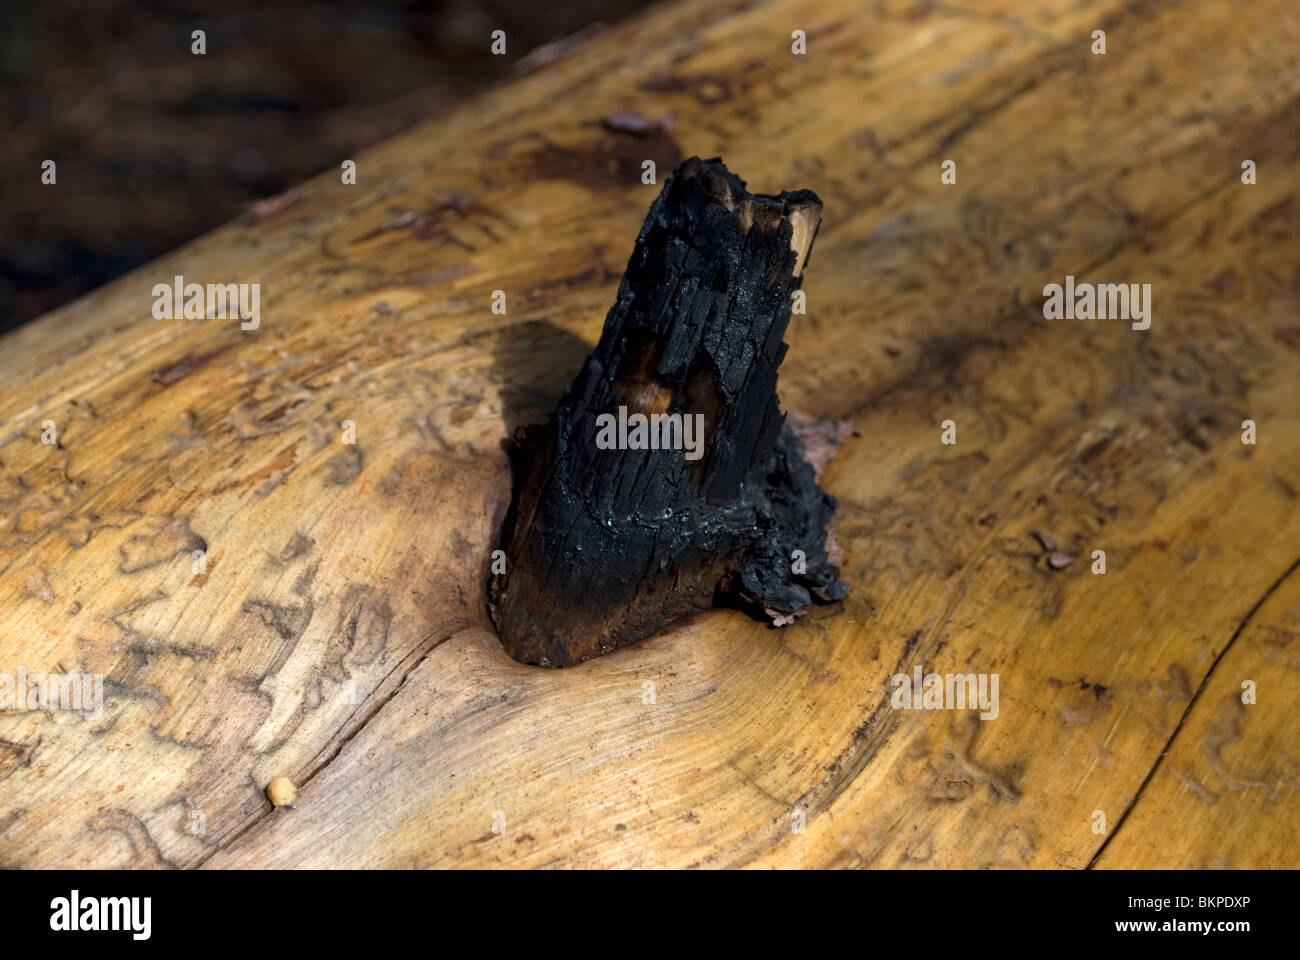 A fallen Southwestern Ponderosa Pine (Pinus brachyptera) stripped of its bark with the attached remains of a burnt branch. Stock Photo